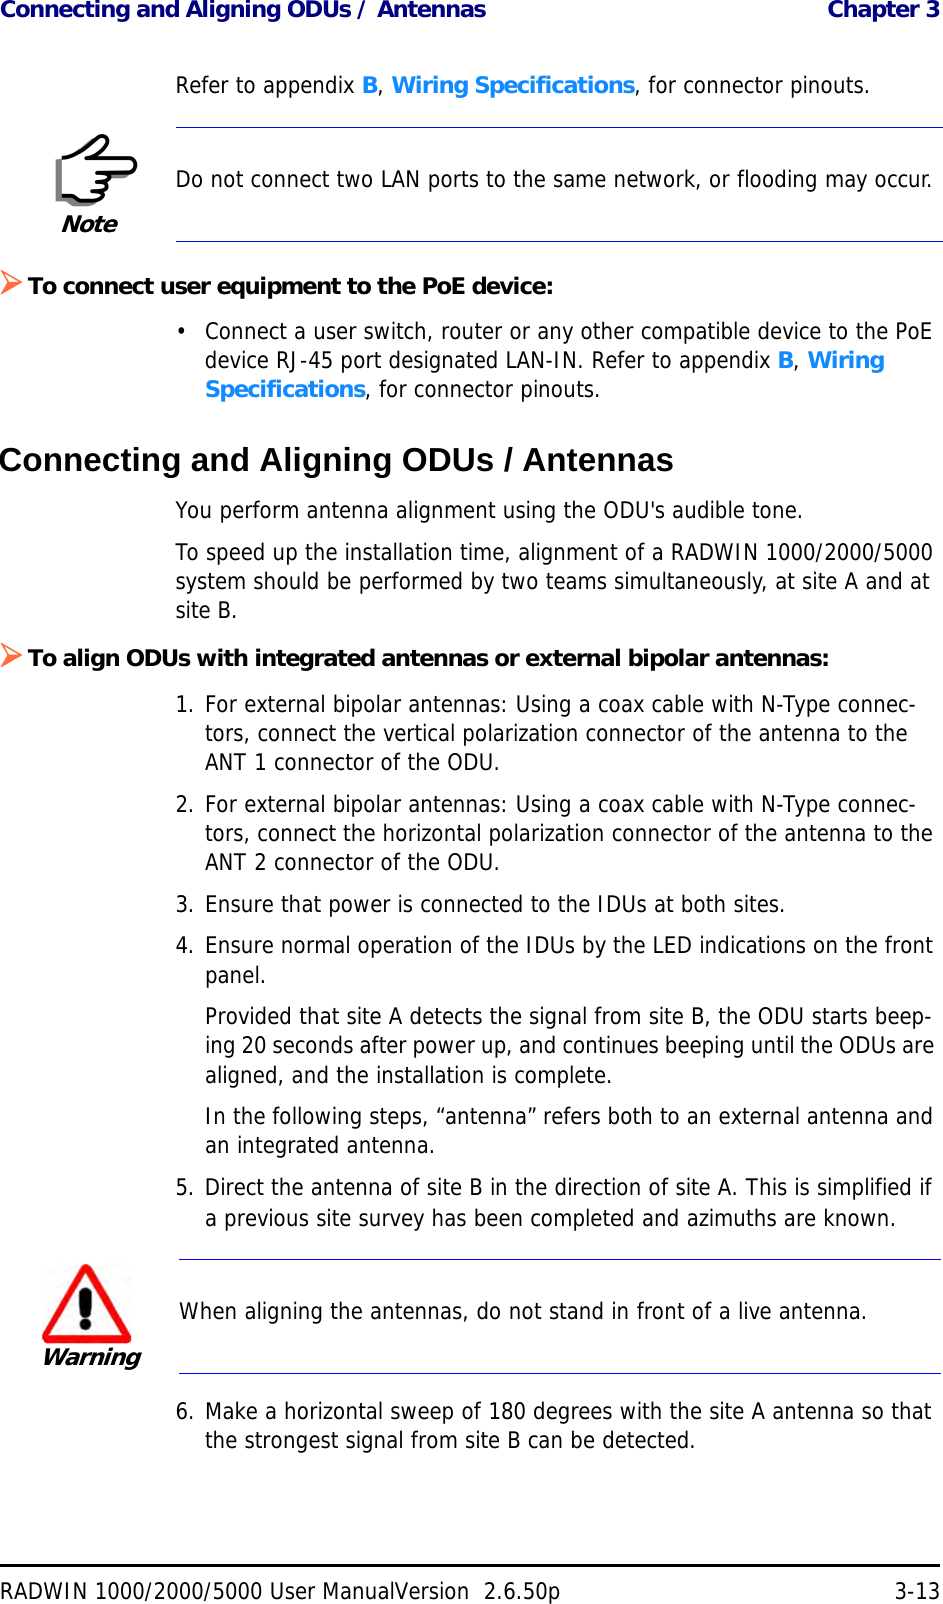 Connecting and Aligning ODUs / Antennas  Chapter 3RADWIN 1000/2000/5000 User ManualVersion  2.6.50p 3-13Refer to appendix B, Wiring Specifications, for connector pinouts.To connect user equipment to the PoE device:• Connect a user switch, router or any other compatible device to the PoE device RJ-45 port designated LAN-IN. Refer to appendix B, Wiring Specifications, for connector pinouts.Connecting and Aligning ODUs / AntennasYou perform antenna alignment using the ODU&apos;s audible tone.To speed up the installation time, alignment of a RADWIN 1000/2000/5000 system should be performed by two teams simultaneously, at site A and at site B.To align ODUs with integrated antennas or external bipolar antennas:1. For external bipolar antennas: Using a coax cable with N-Type connec-tors, connect the vertical polarization connector of the antenna to the ANT 1 connector of the ODU.2. For external bipolar antennas: Using a coax cable with N-Type connec-tors, connect the horizontal polarization connector of the antenna to the ANT 2 connector of the ODU.3. Ensure that power is connected to the IDUs at both sites.4. Ensure normal operation of the IDUs by the LED indications on the front panel.Provided that site A detects the signal from site B, the ODU starts beep-ing 20 seconds after power up, and continues beeping until the ODUs are aligned, and the installation is complete.In the following steps, “antenna” refers both to an external antenna and an integrated antenna.5. Direct the antenna of site B in the direction of site A. This is simplified if a previous site survey has been completed and azimuths are known.6. Make a horizontal sweep of 180 degrees with the site A antenna so that the strongest signal from site B can be detected.NoteDo not connect two LAN ports to the same network, or flooding may occur.WarningWhen aligning the antennas, do not stand in front of a live antenna.